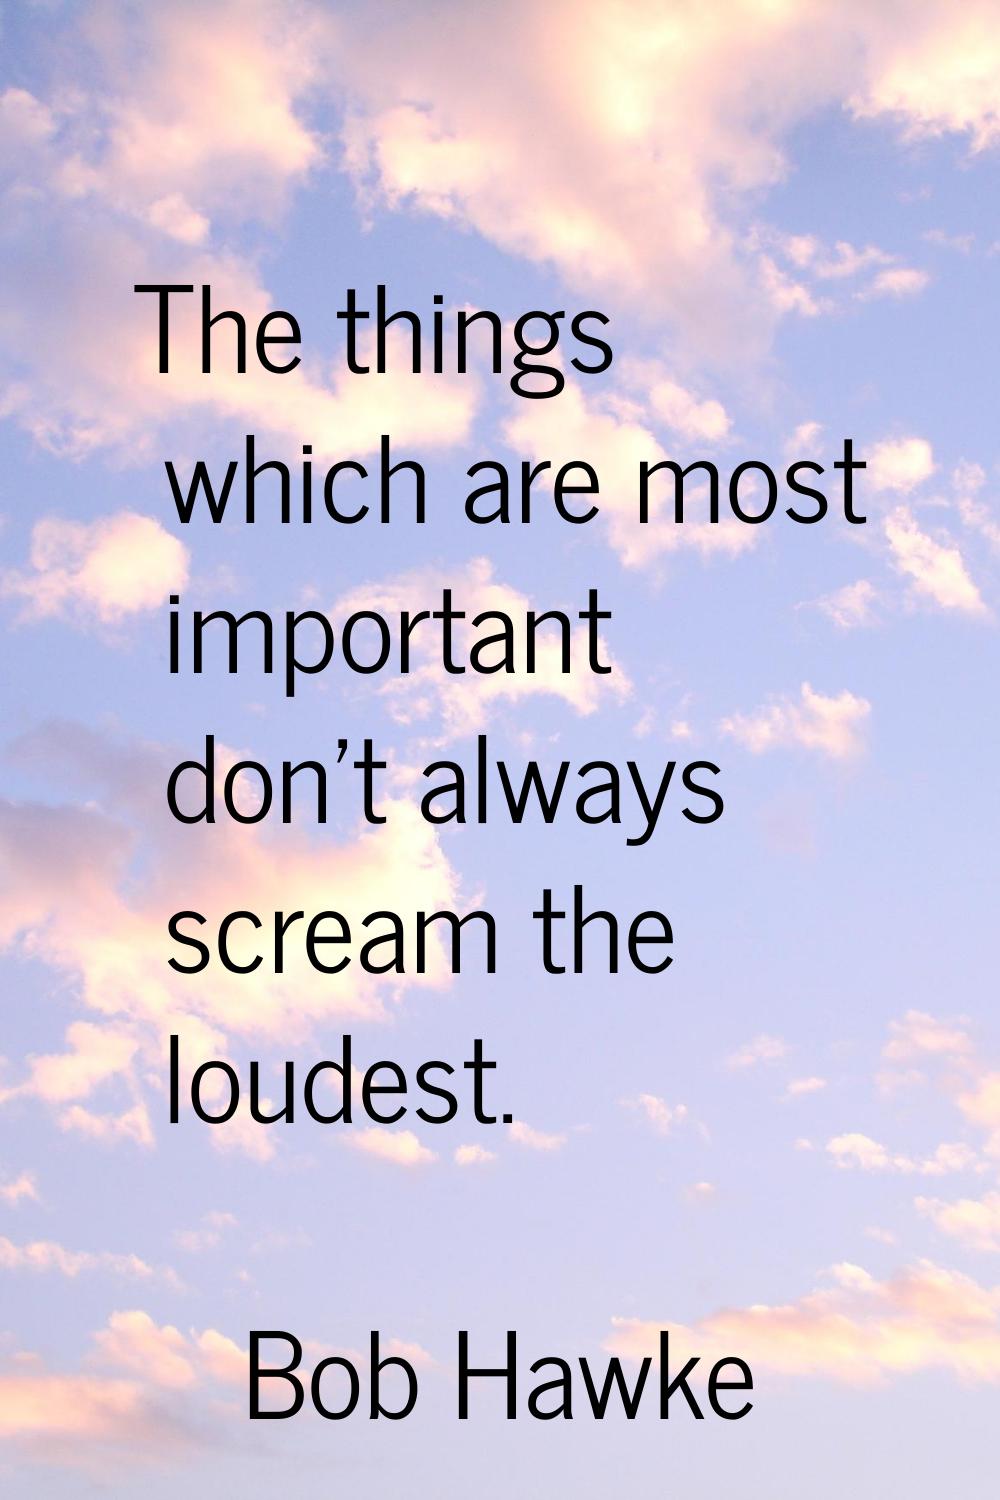 The things which are most important don't always scream the loudest.